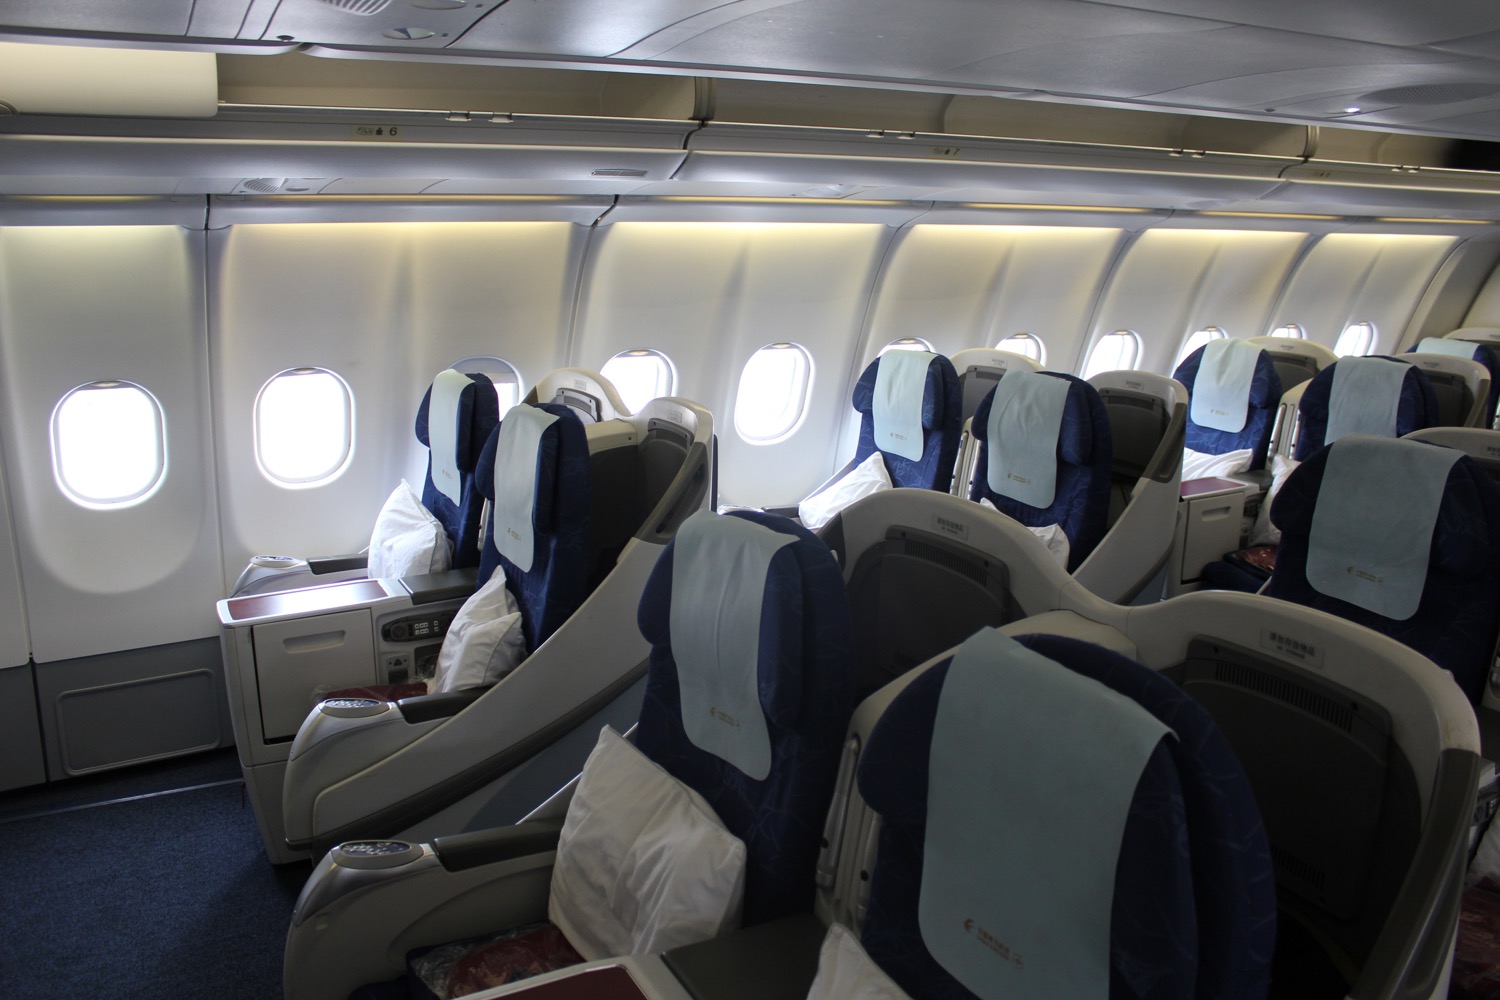 shanghai airlines business class review